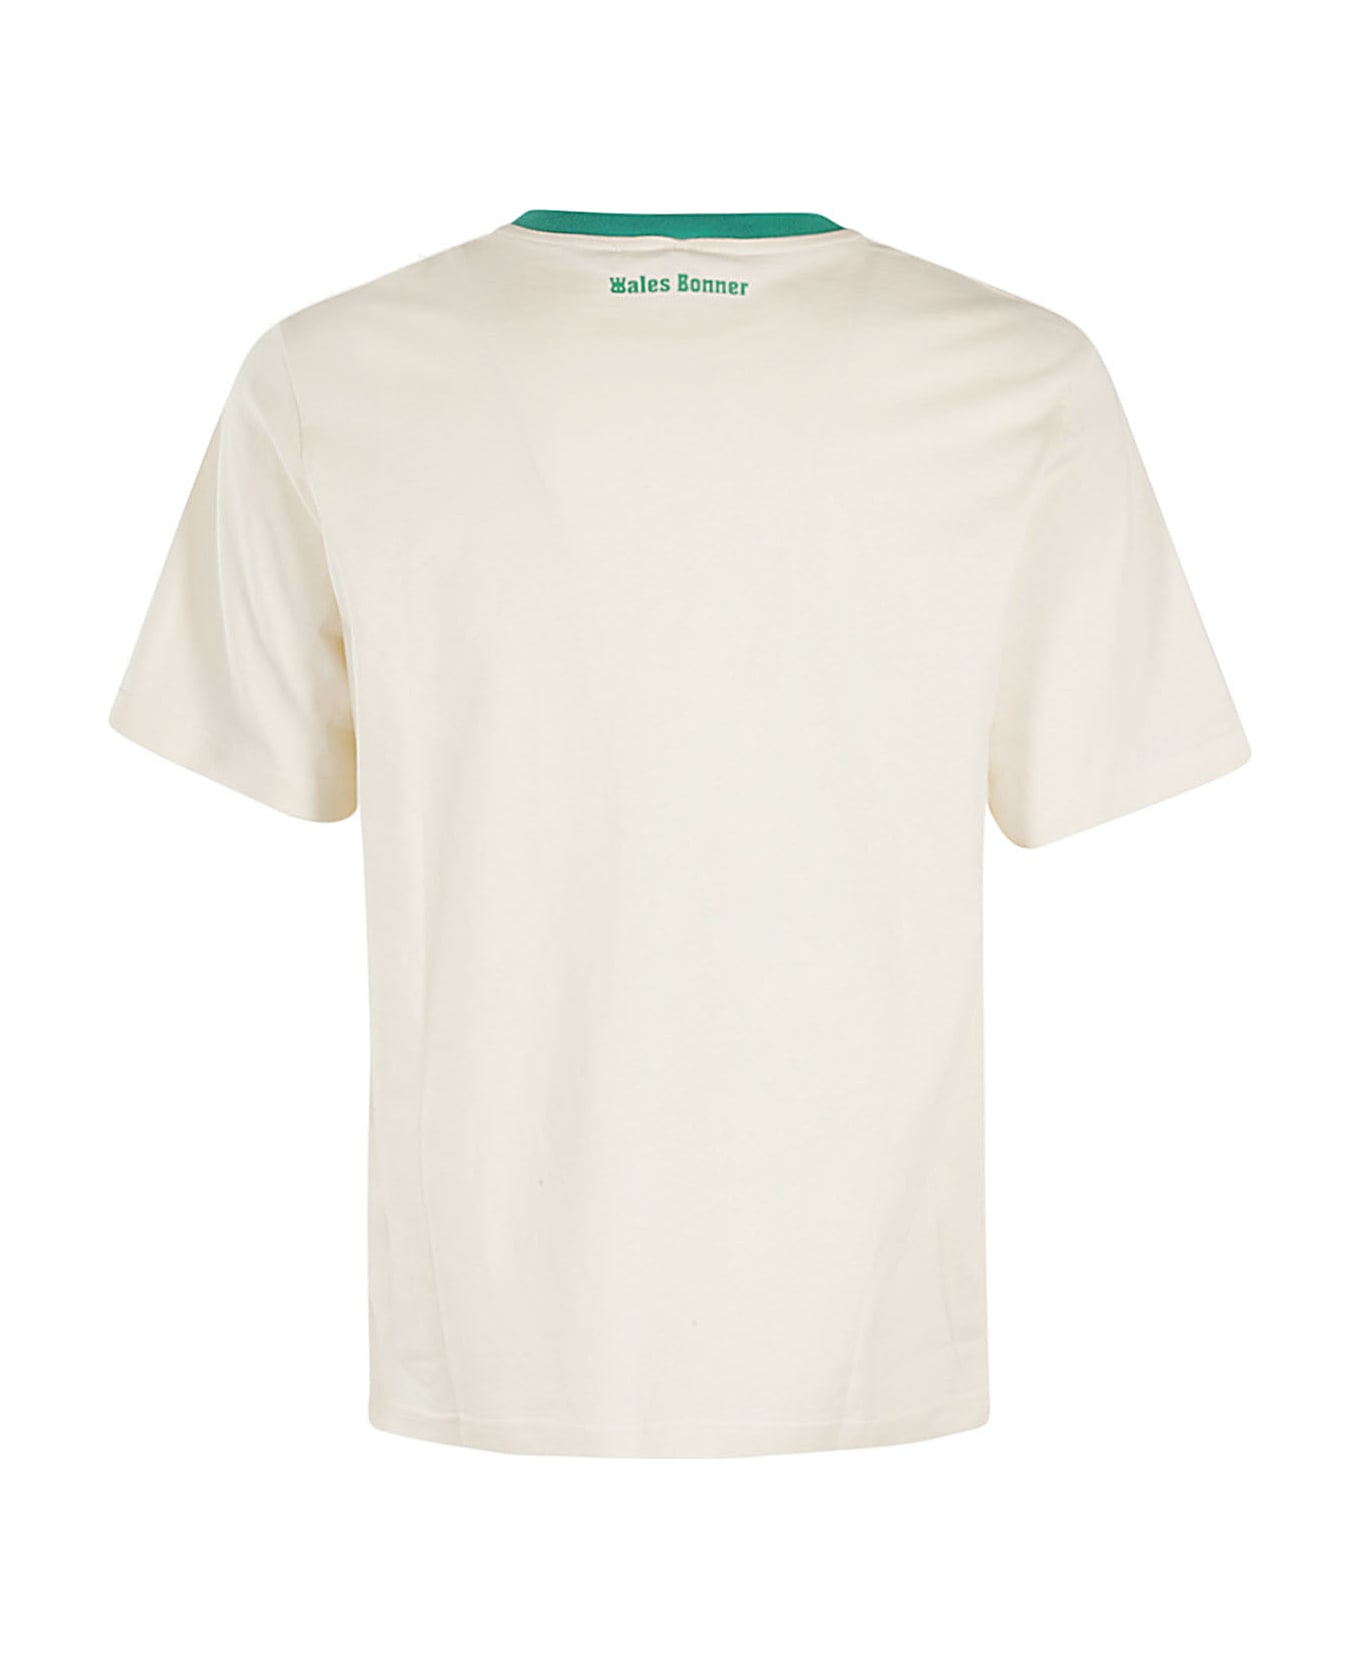 Wales Bonner Resilience T Shirt - Ivory シャツ